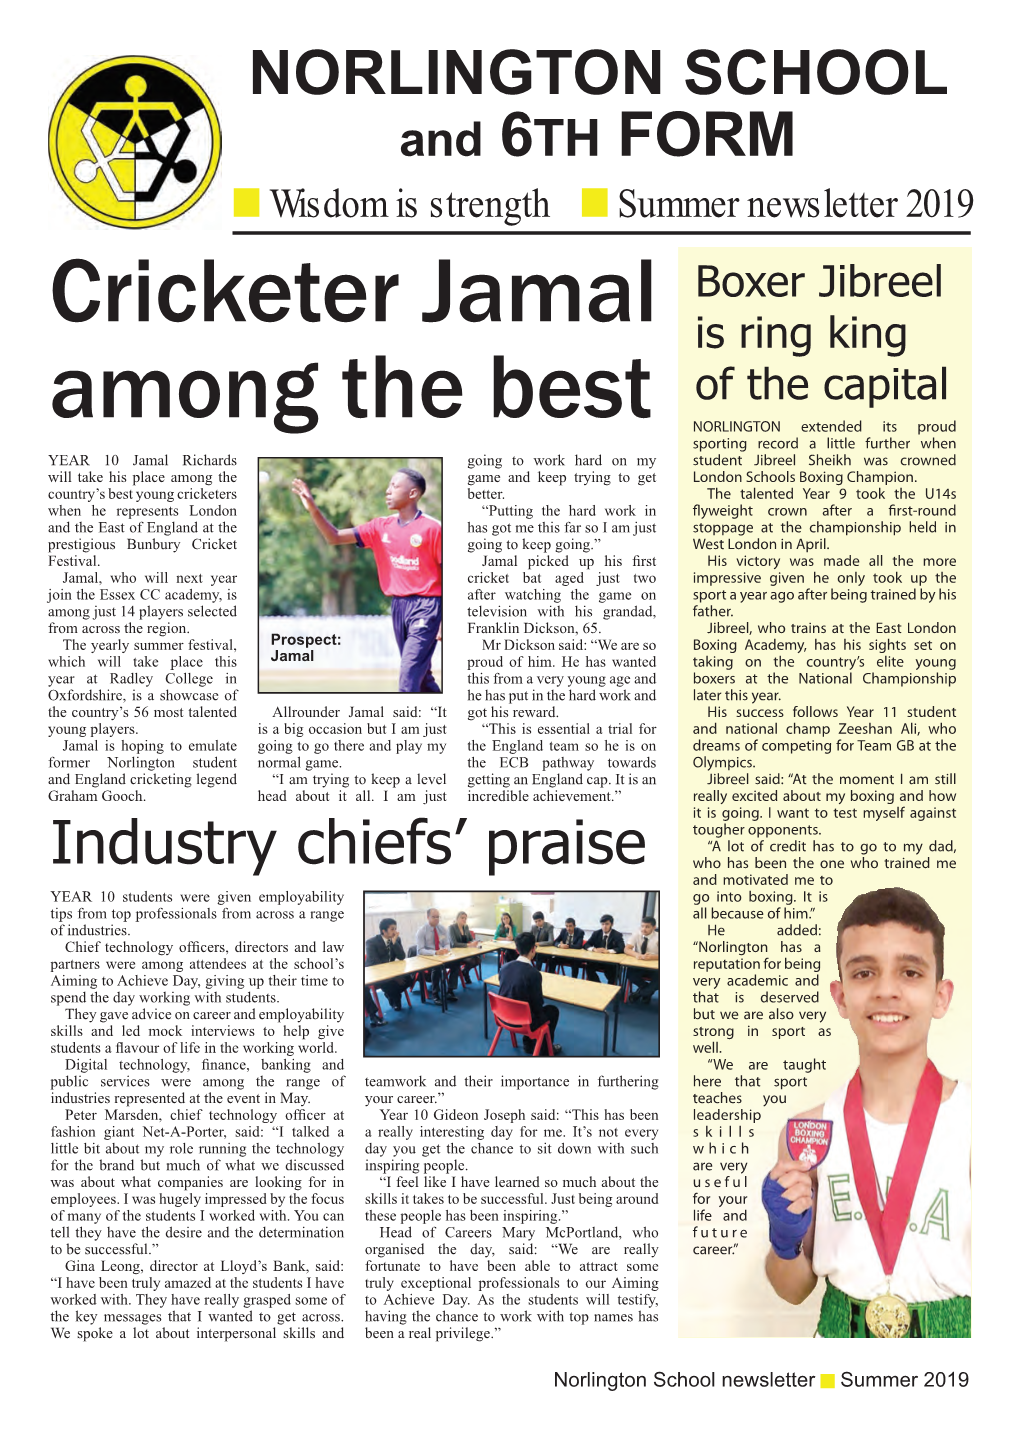 Cricketer Jamal Among the Best